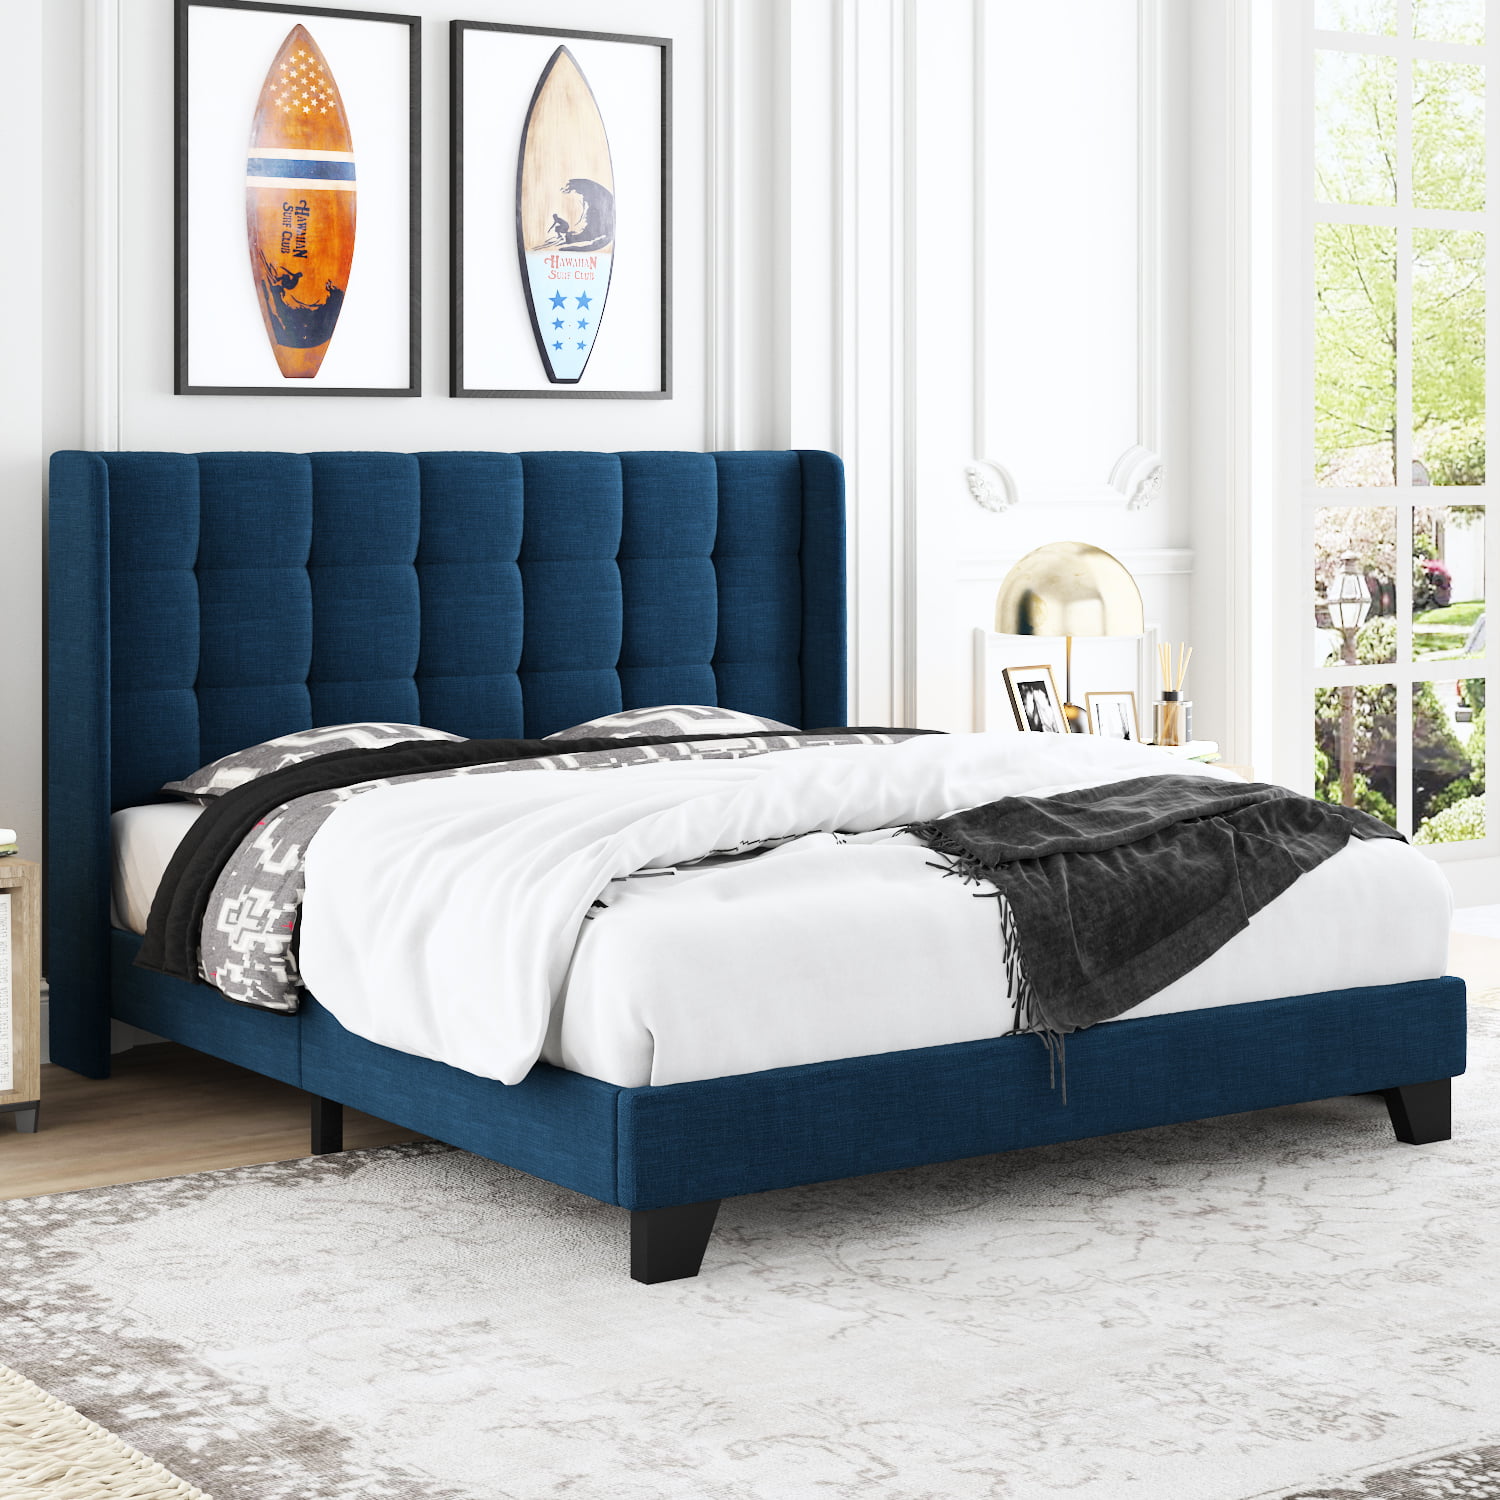 Details about   Allewie Queen Size Platform Bed Frame With Fabric Upholstered Headboard And Wood 